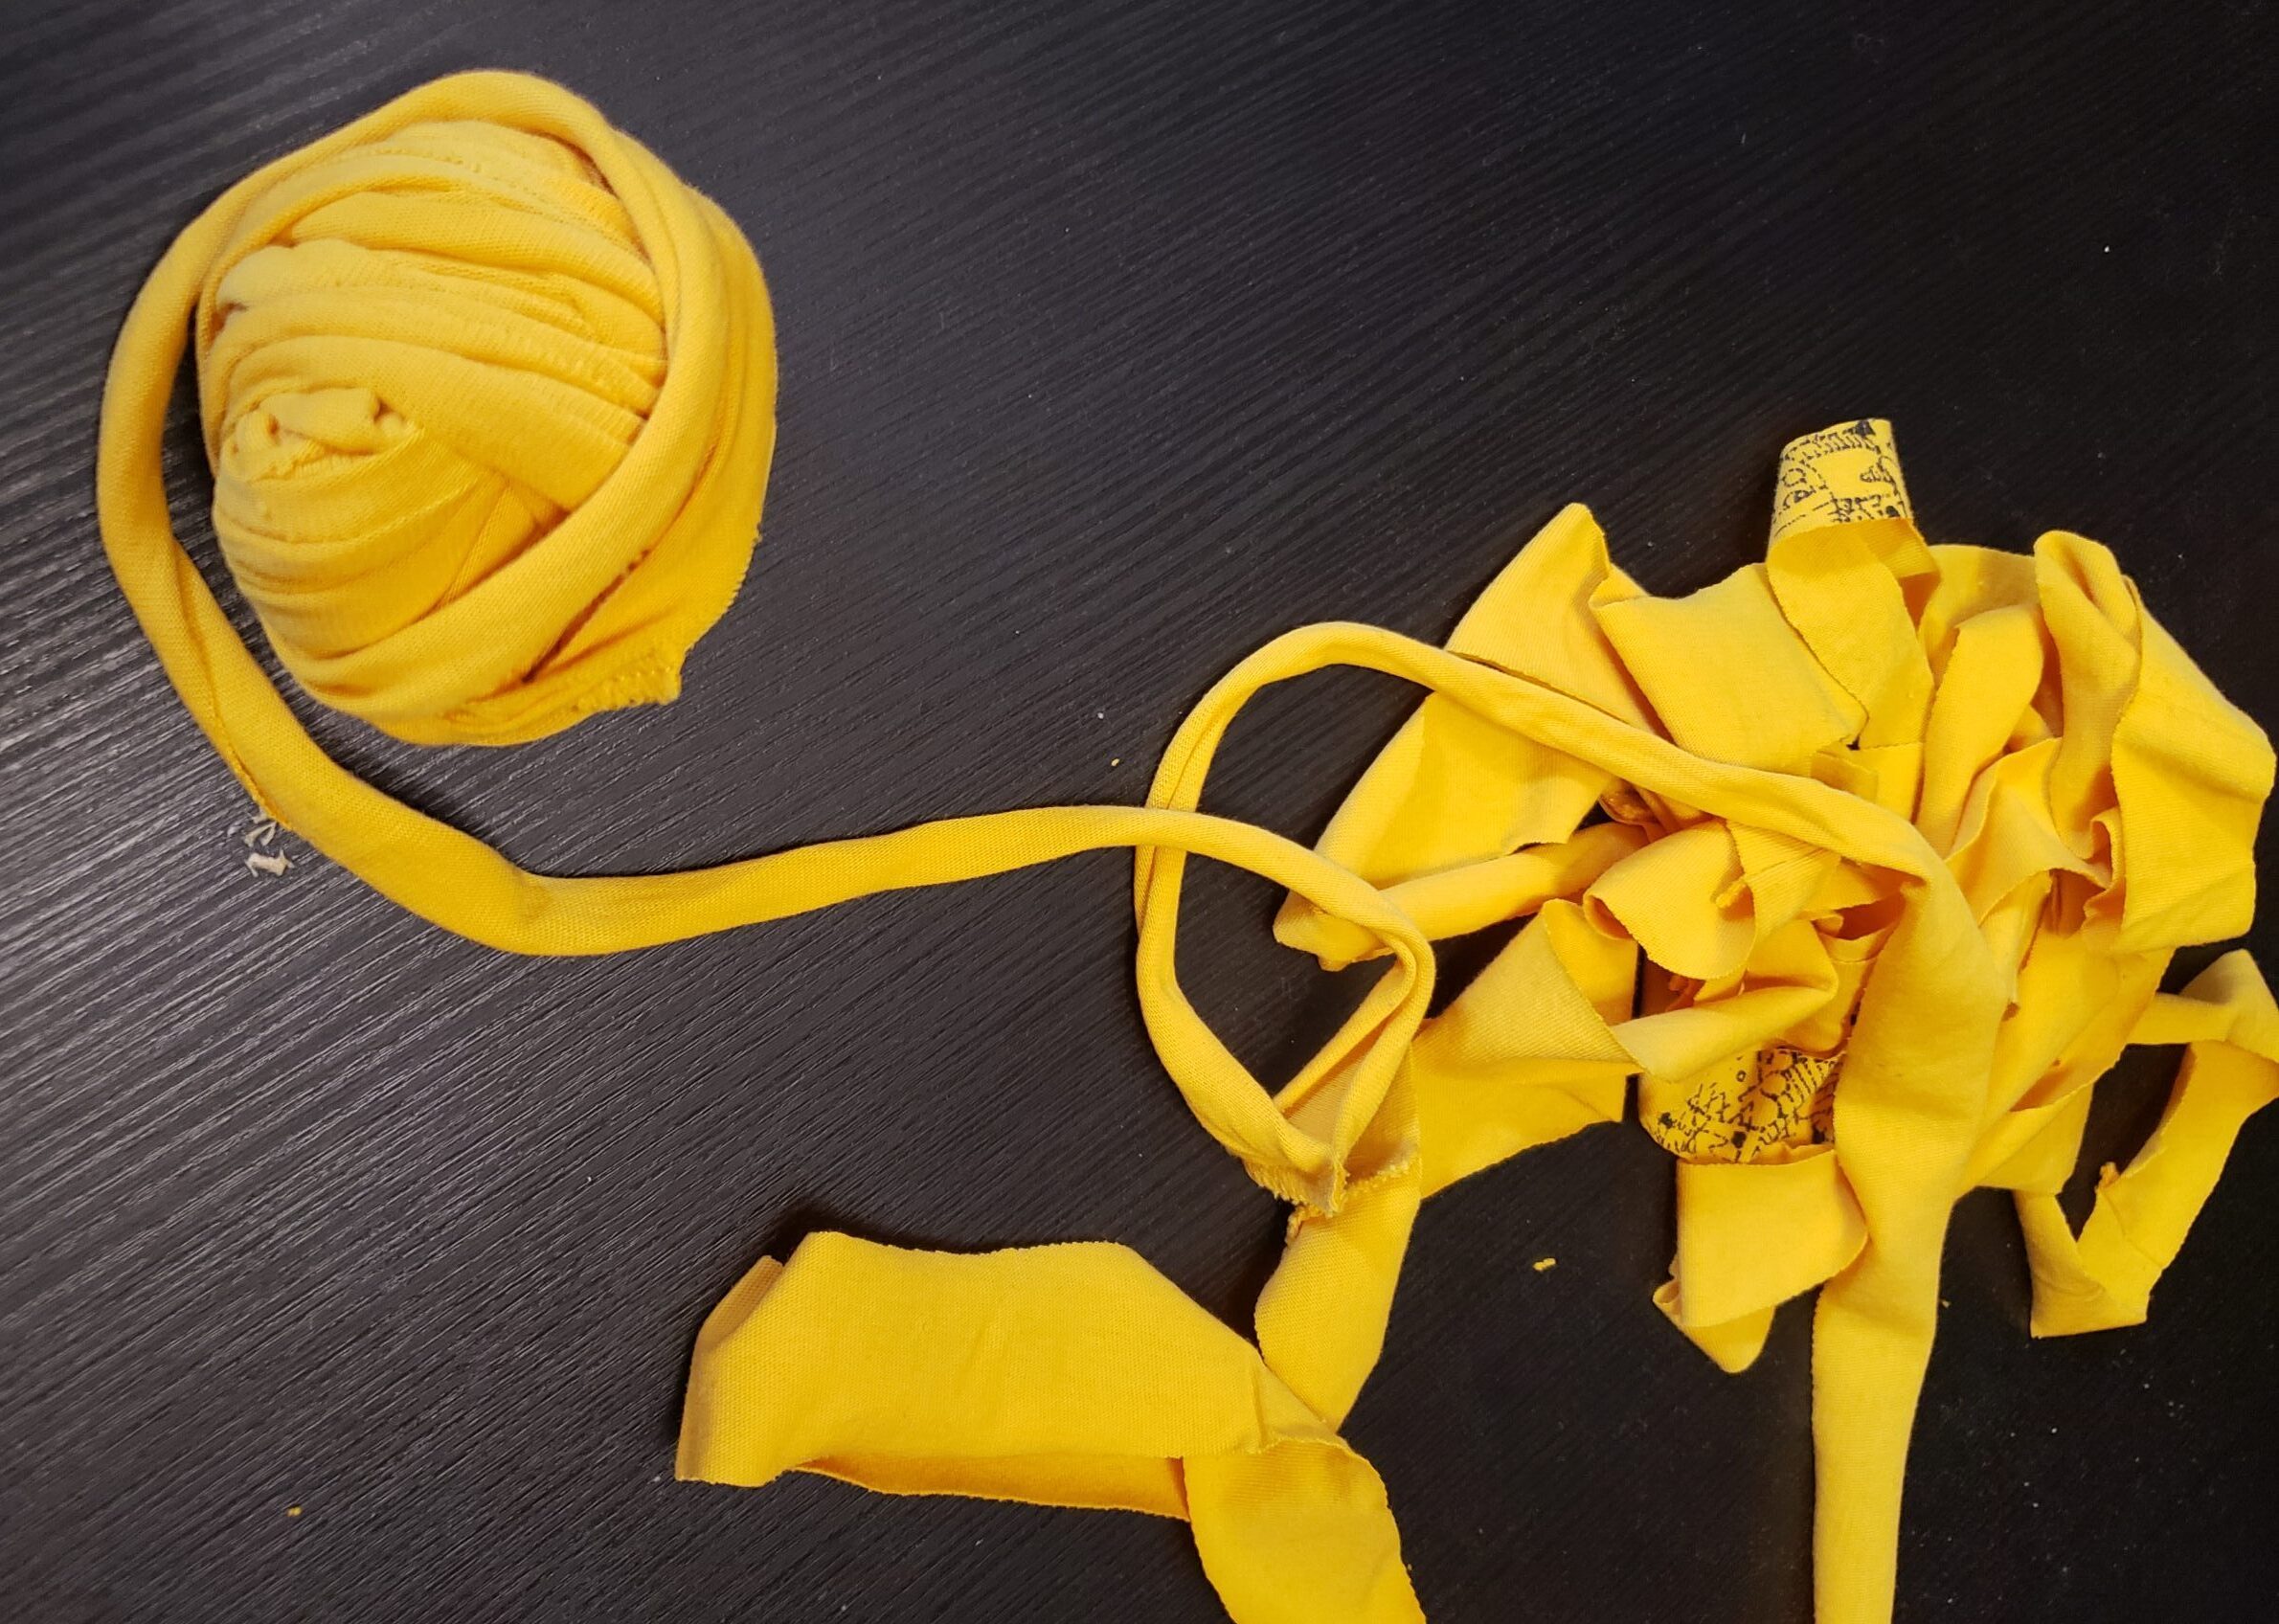 a yellow ball of yarn made from a yellow t-shirt